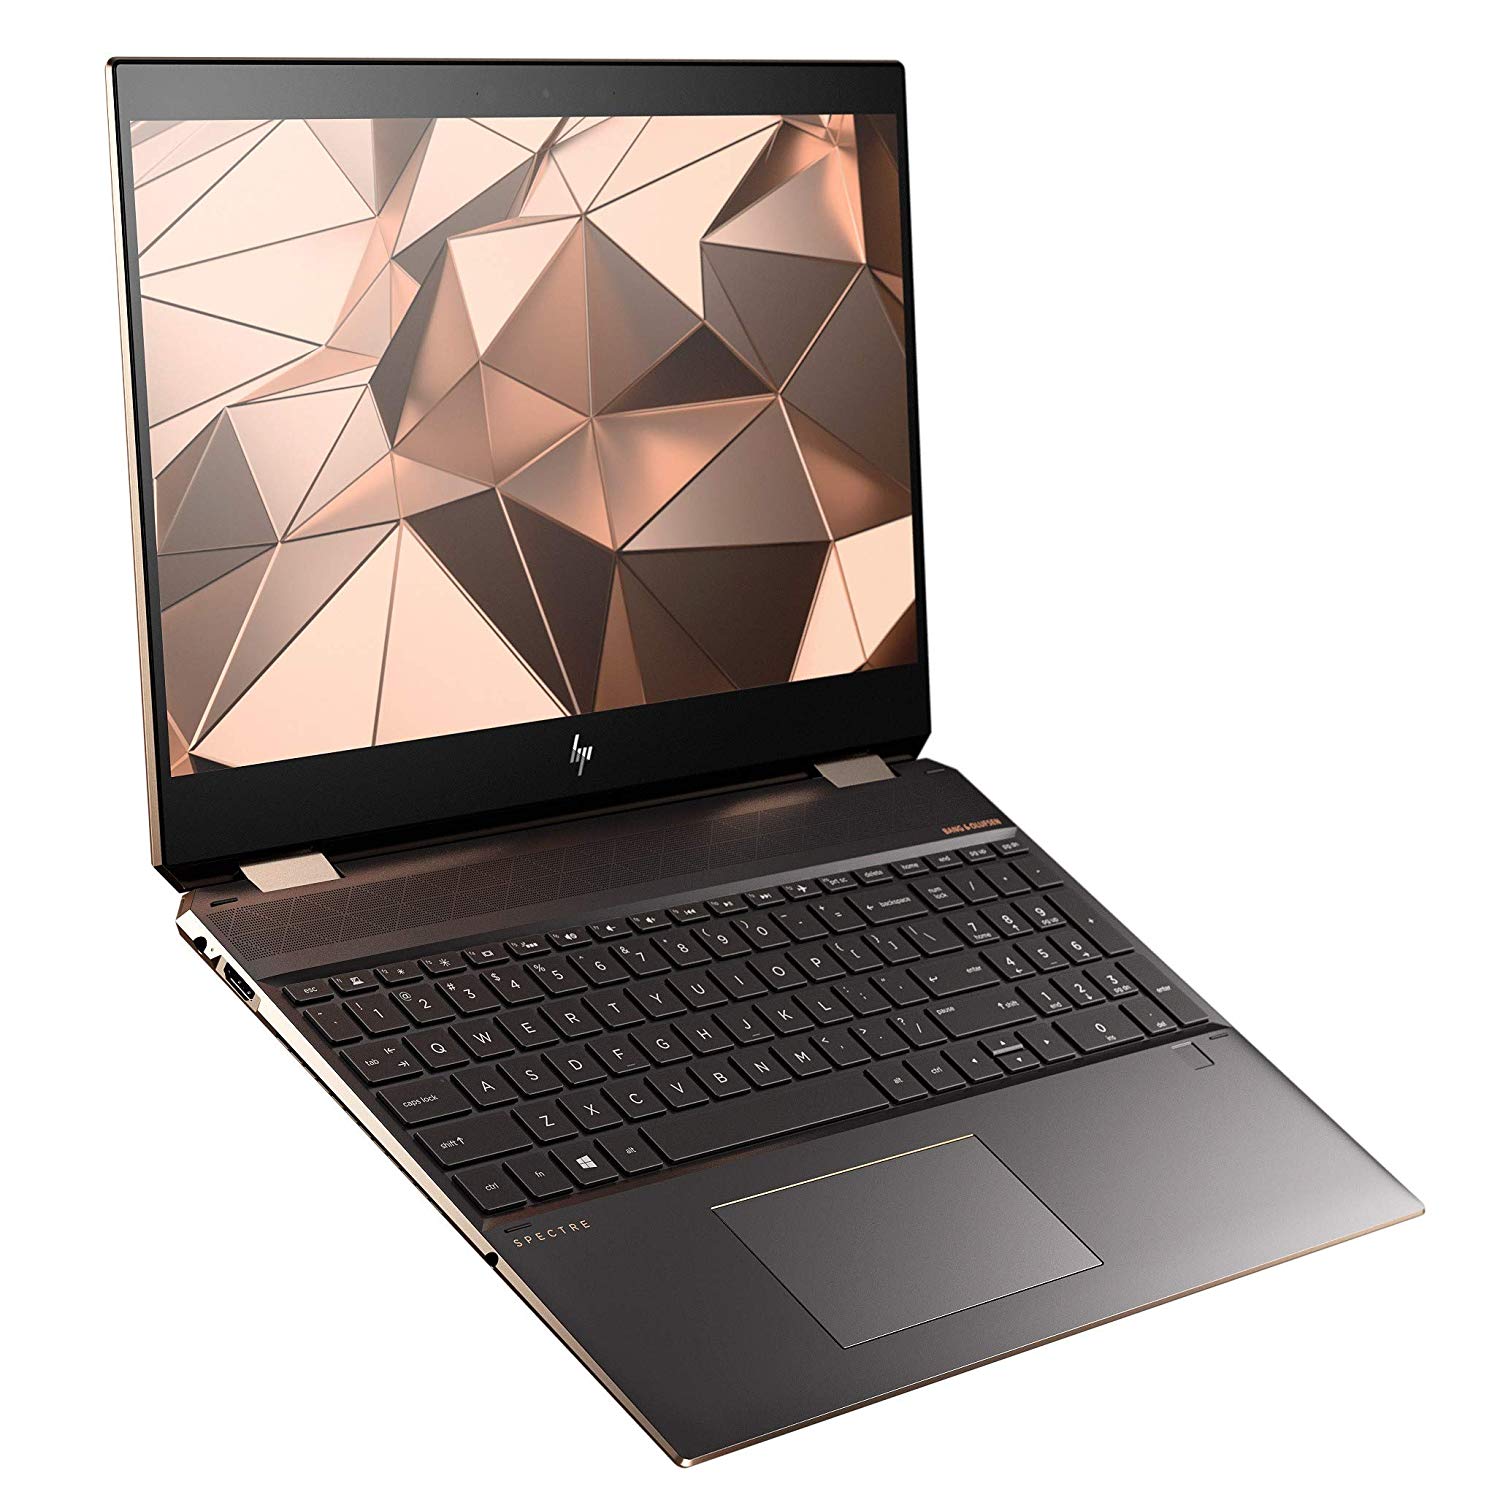 HP Spectre X360 15df1004TX Launched in India